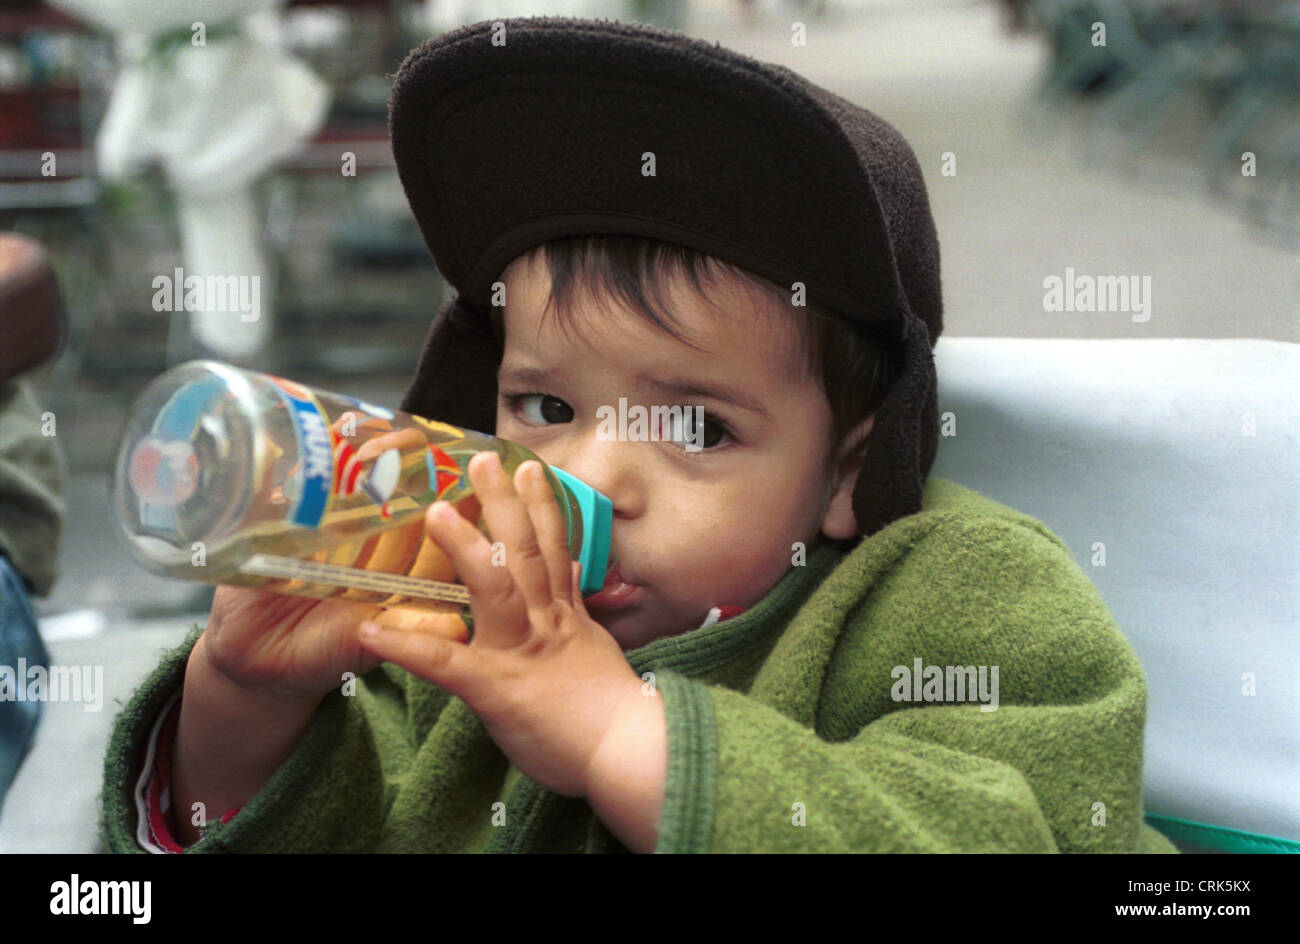 Small child drinking from baby bottle Stock Photo